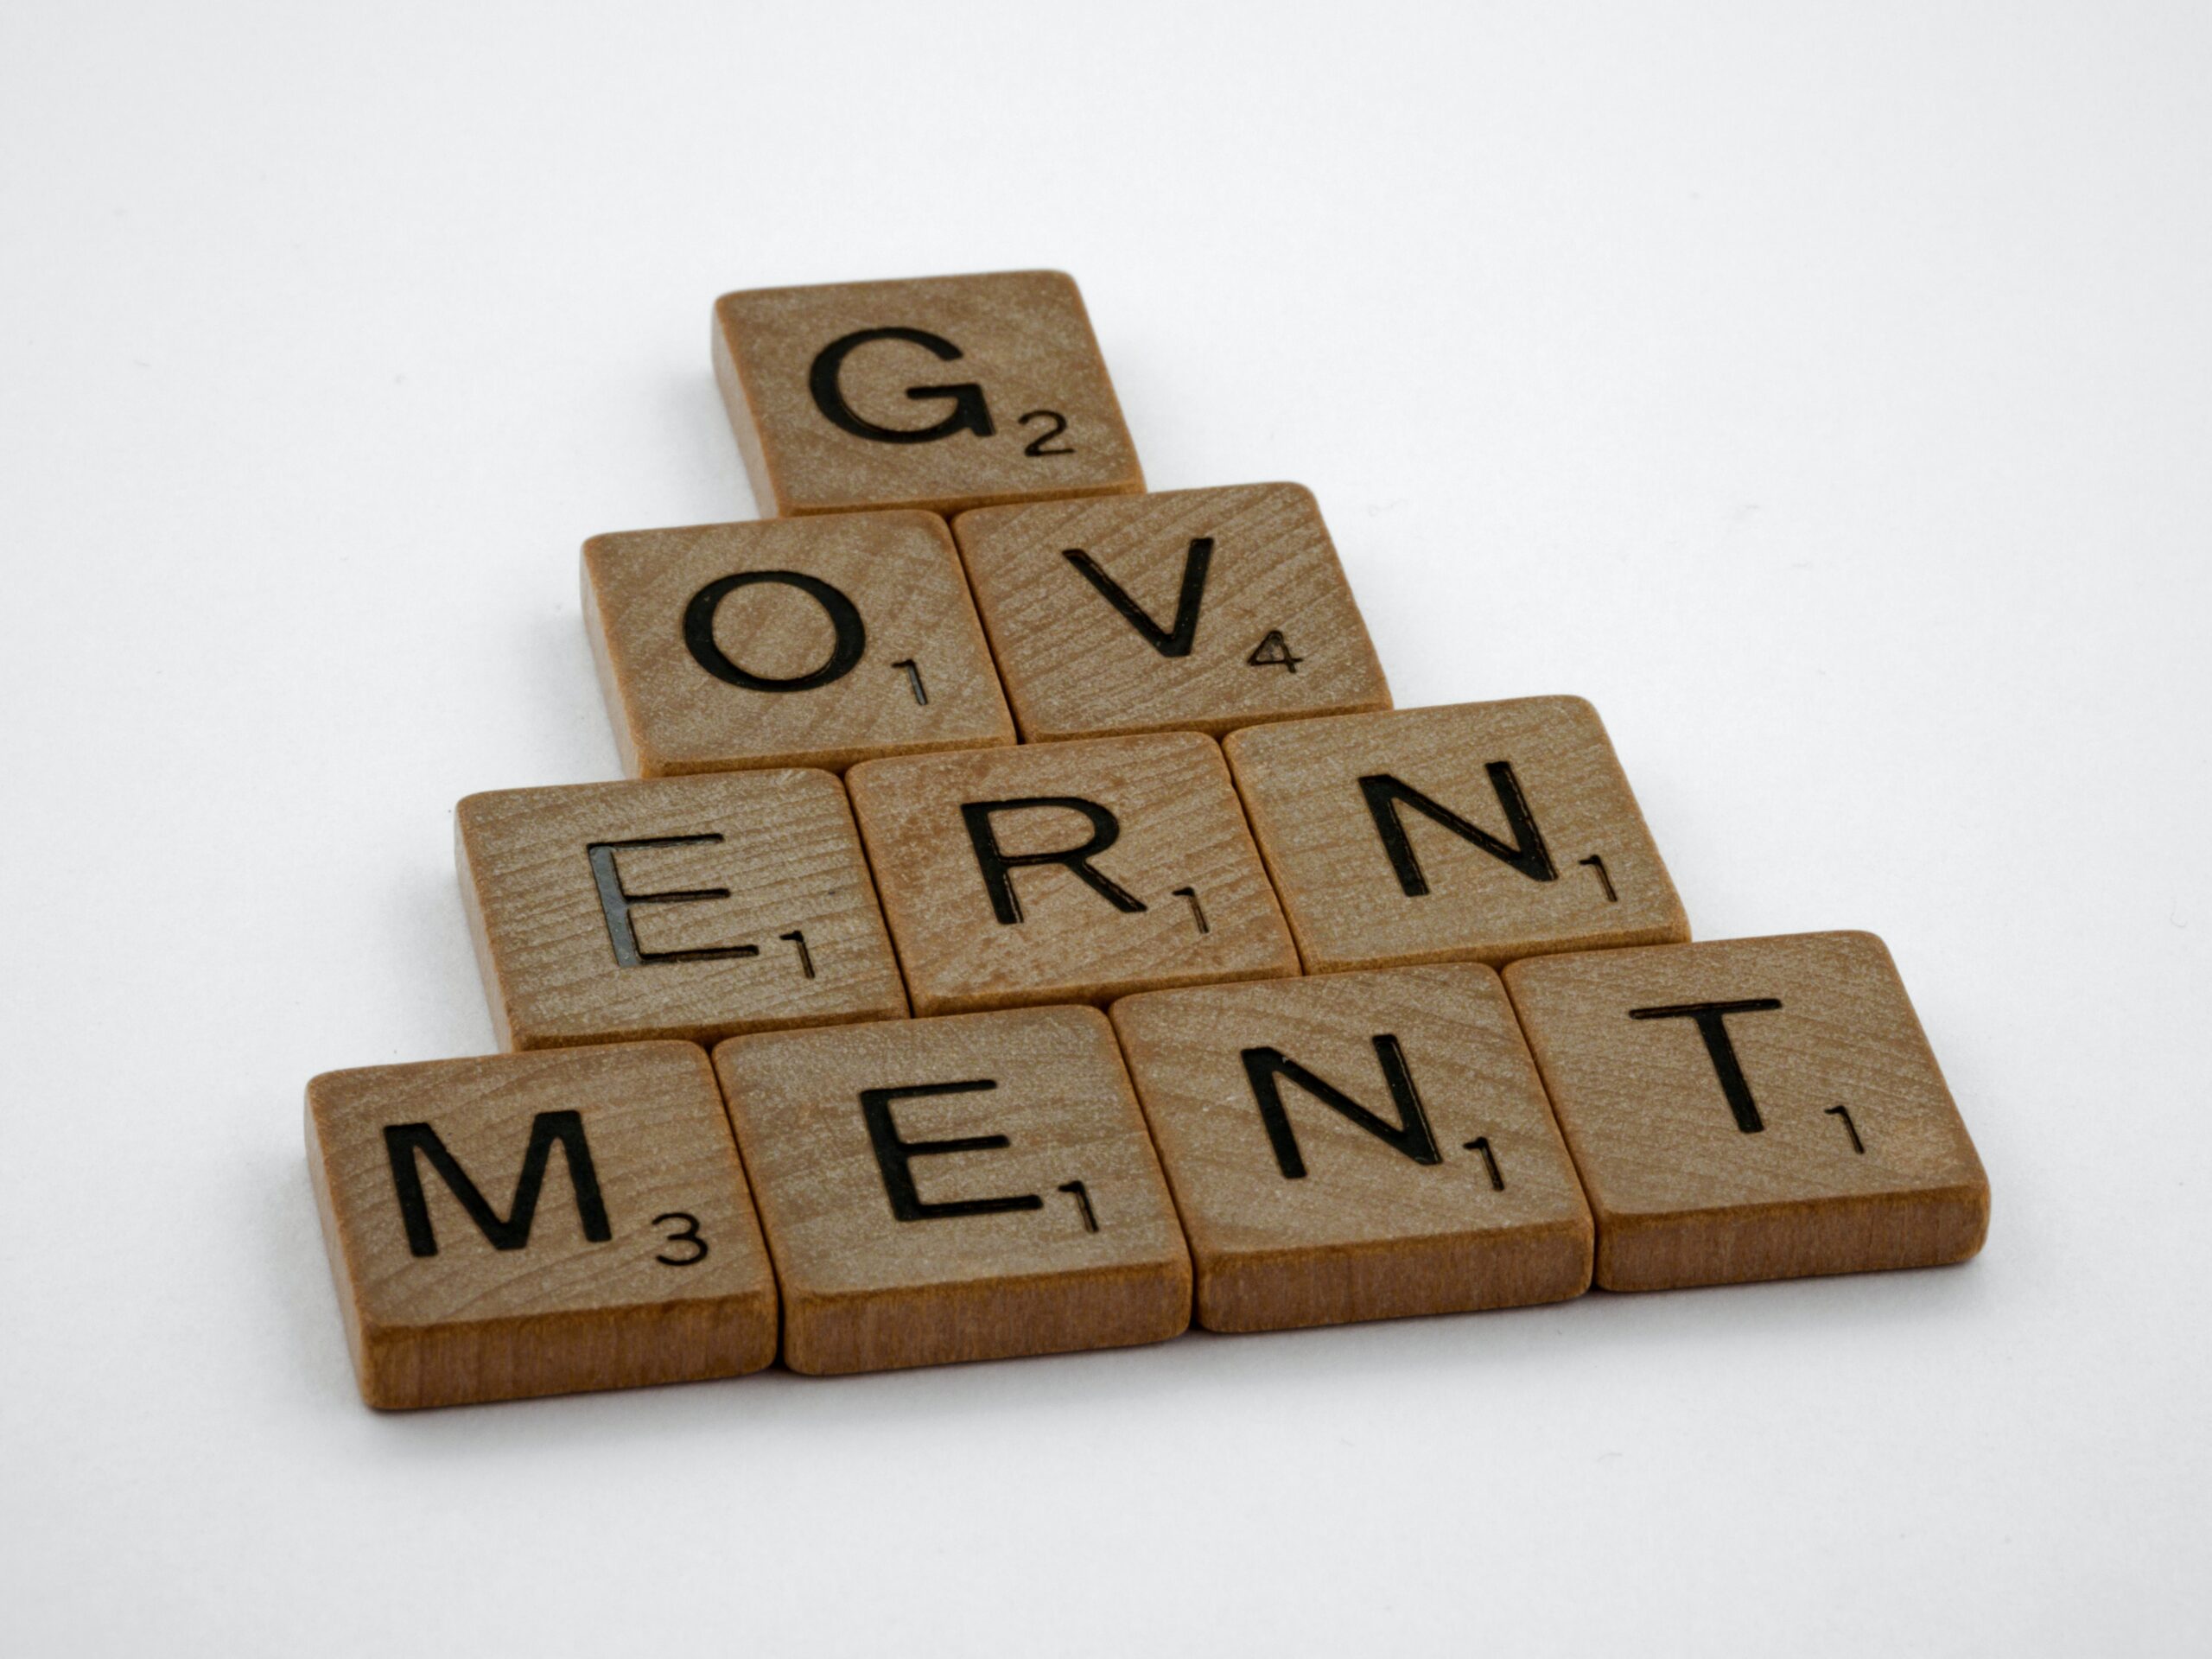 Government spelt out in Scrabble discs, formatted in a triangular shape, G at the top, OV underneath, ERN under that, and finally MENT on the bottom tier of the triangle